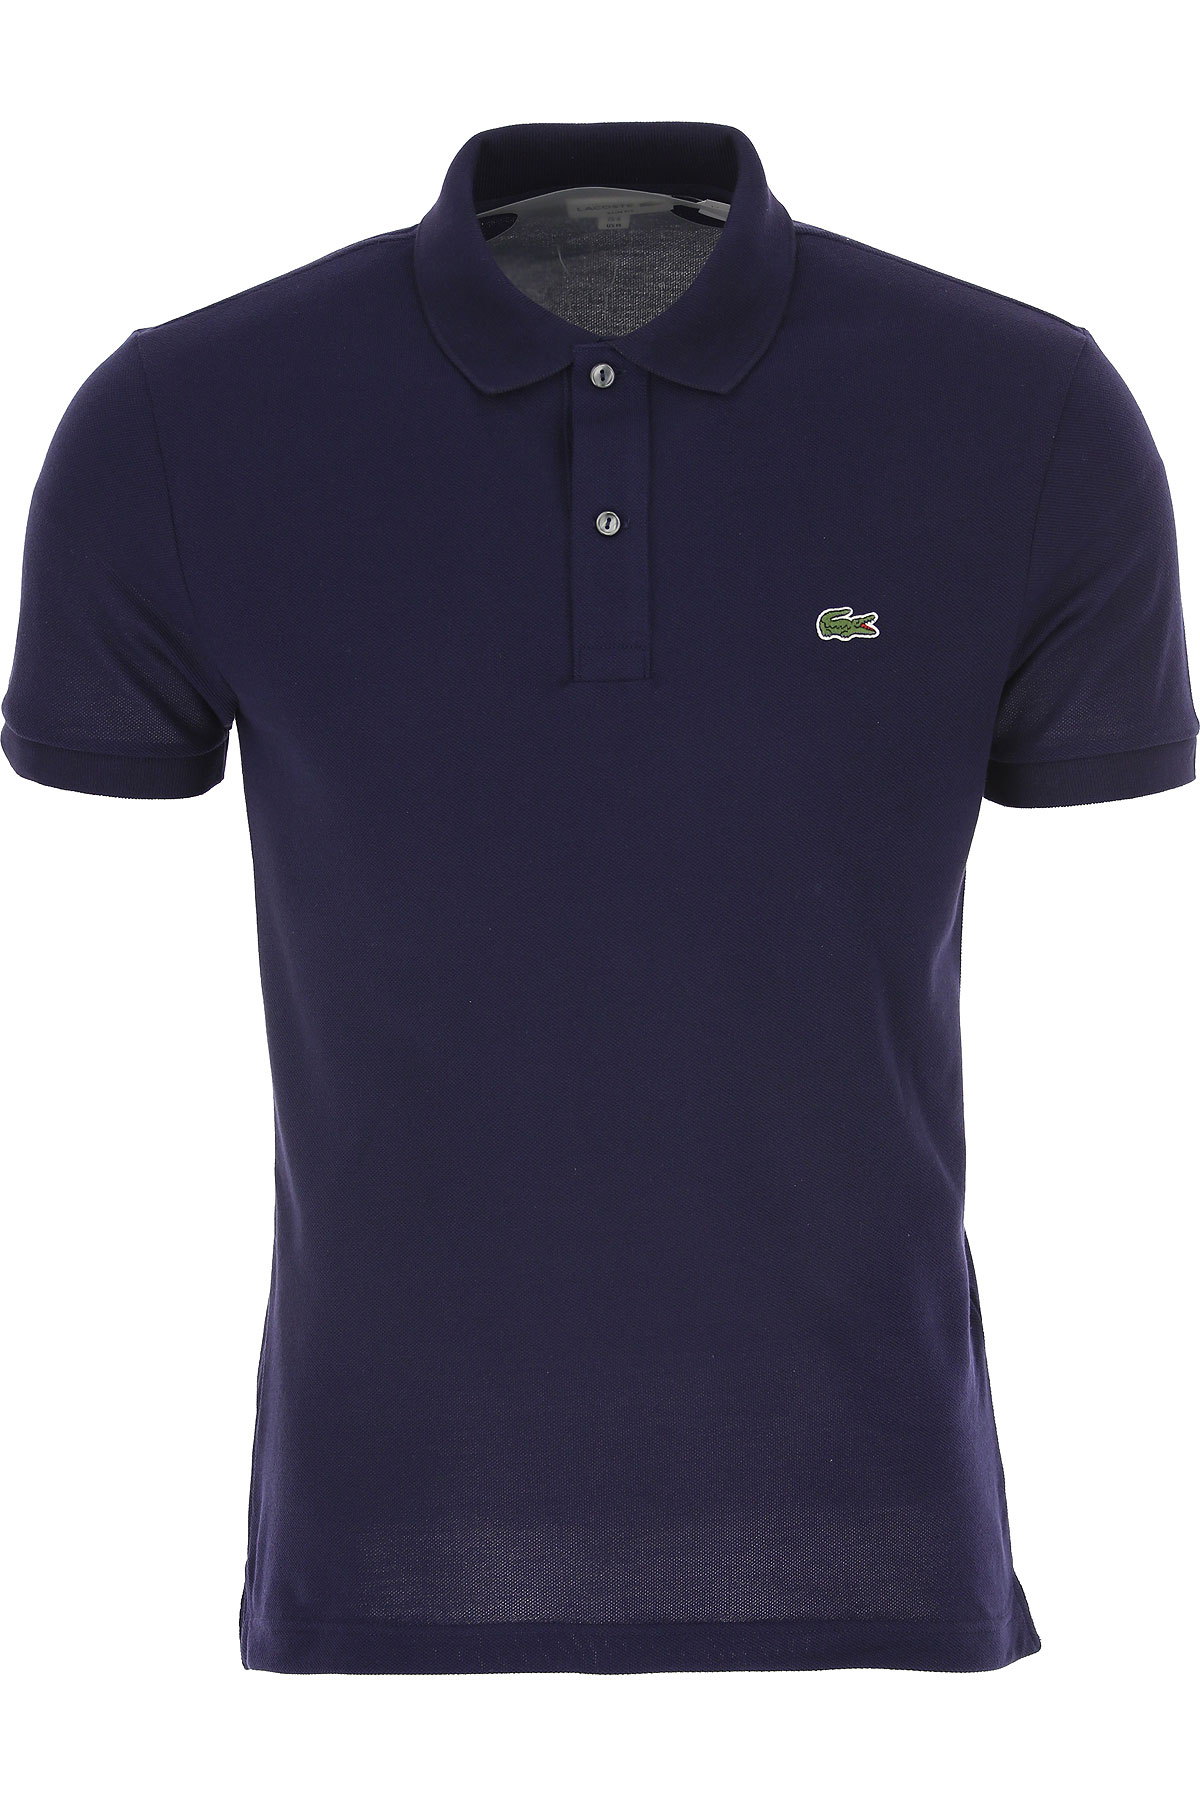 Mens Clothing Lacoste, Style code: ph4012-166-